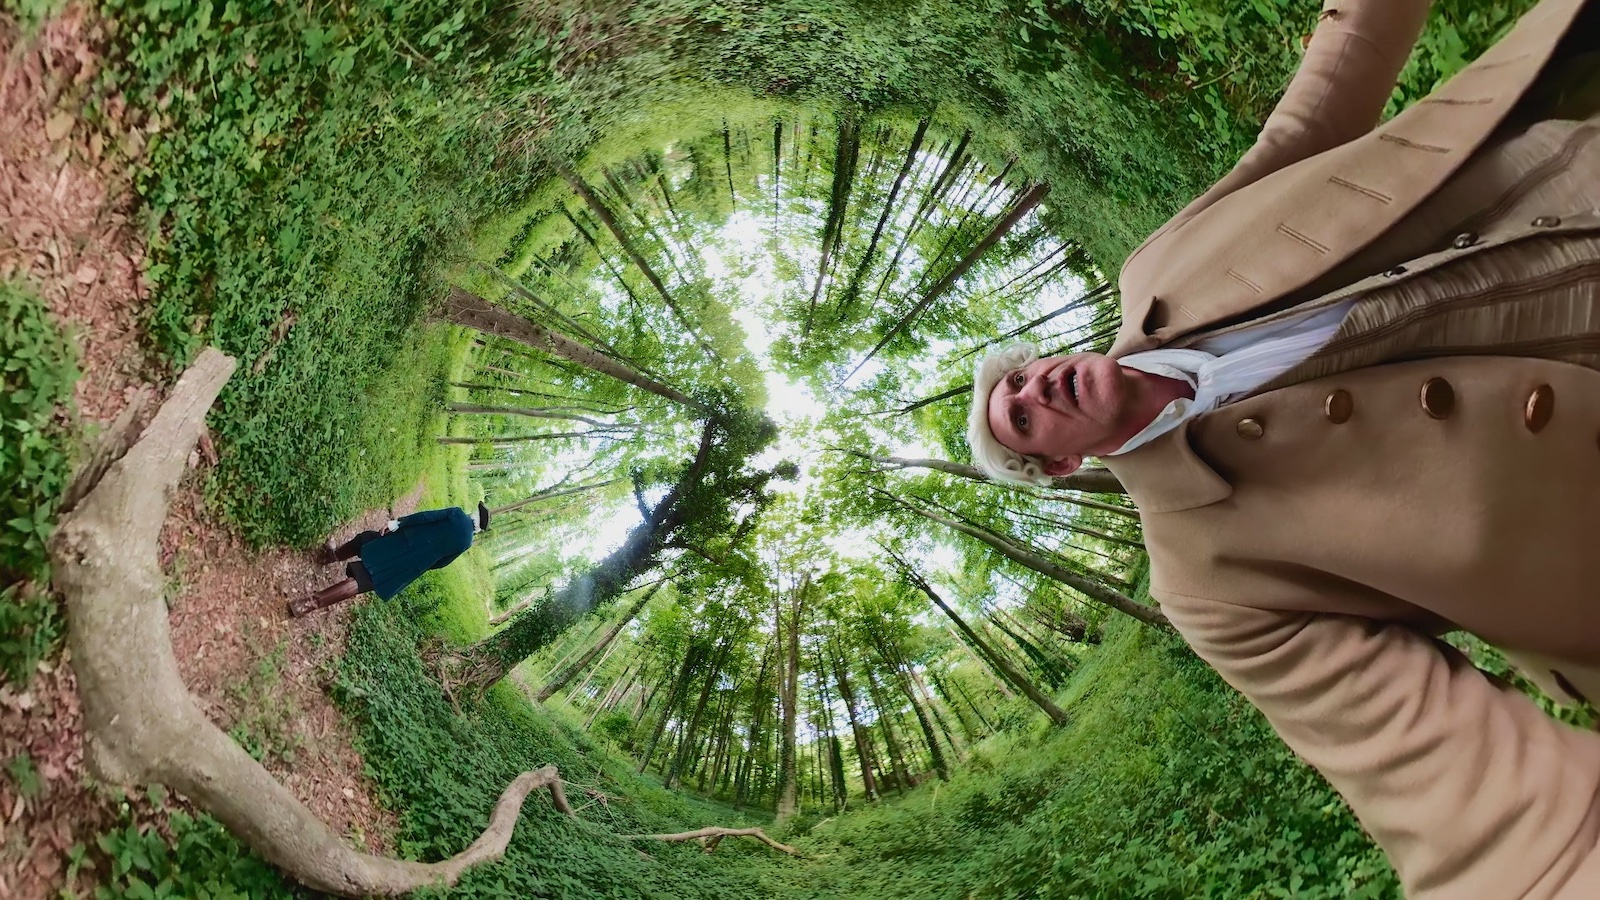 A fantasy spiral effect of an outdoor scene of two men in a green forest